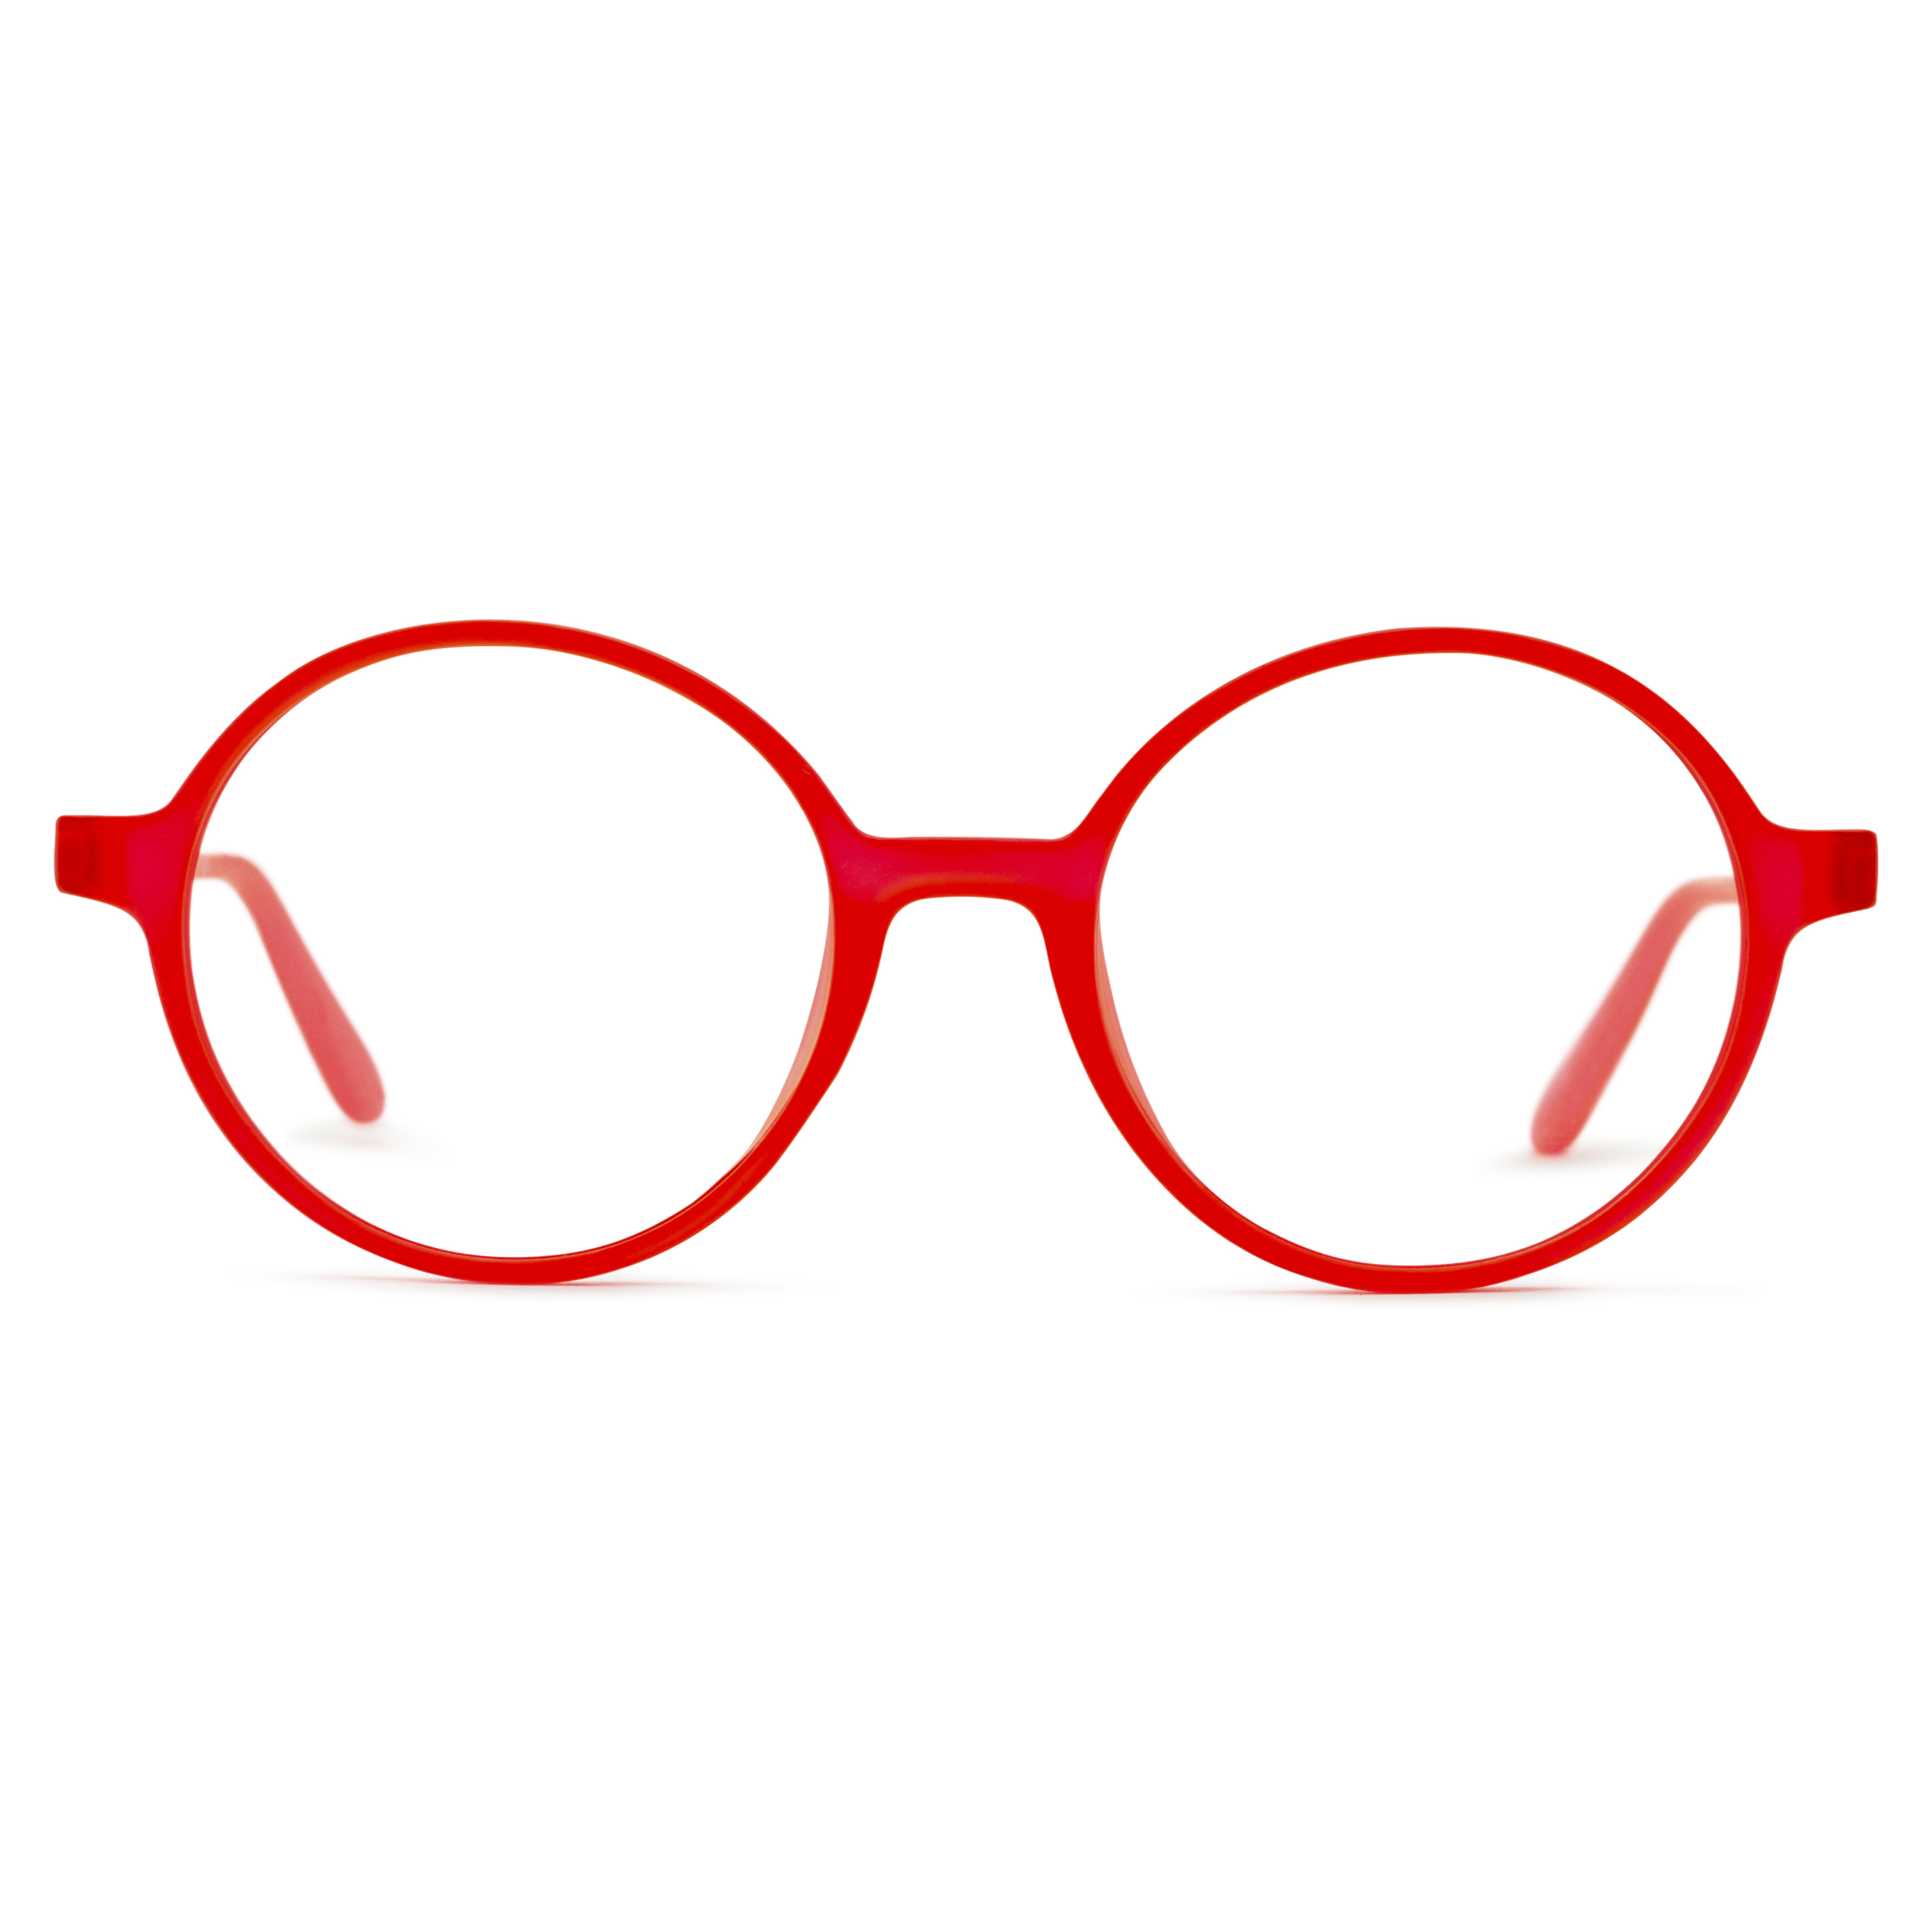 Women's Round Reading Glasses In Red By Foster Grant - Bartlett - +2.50